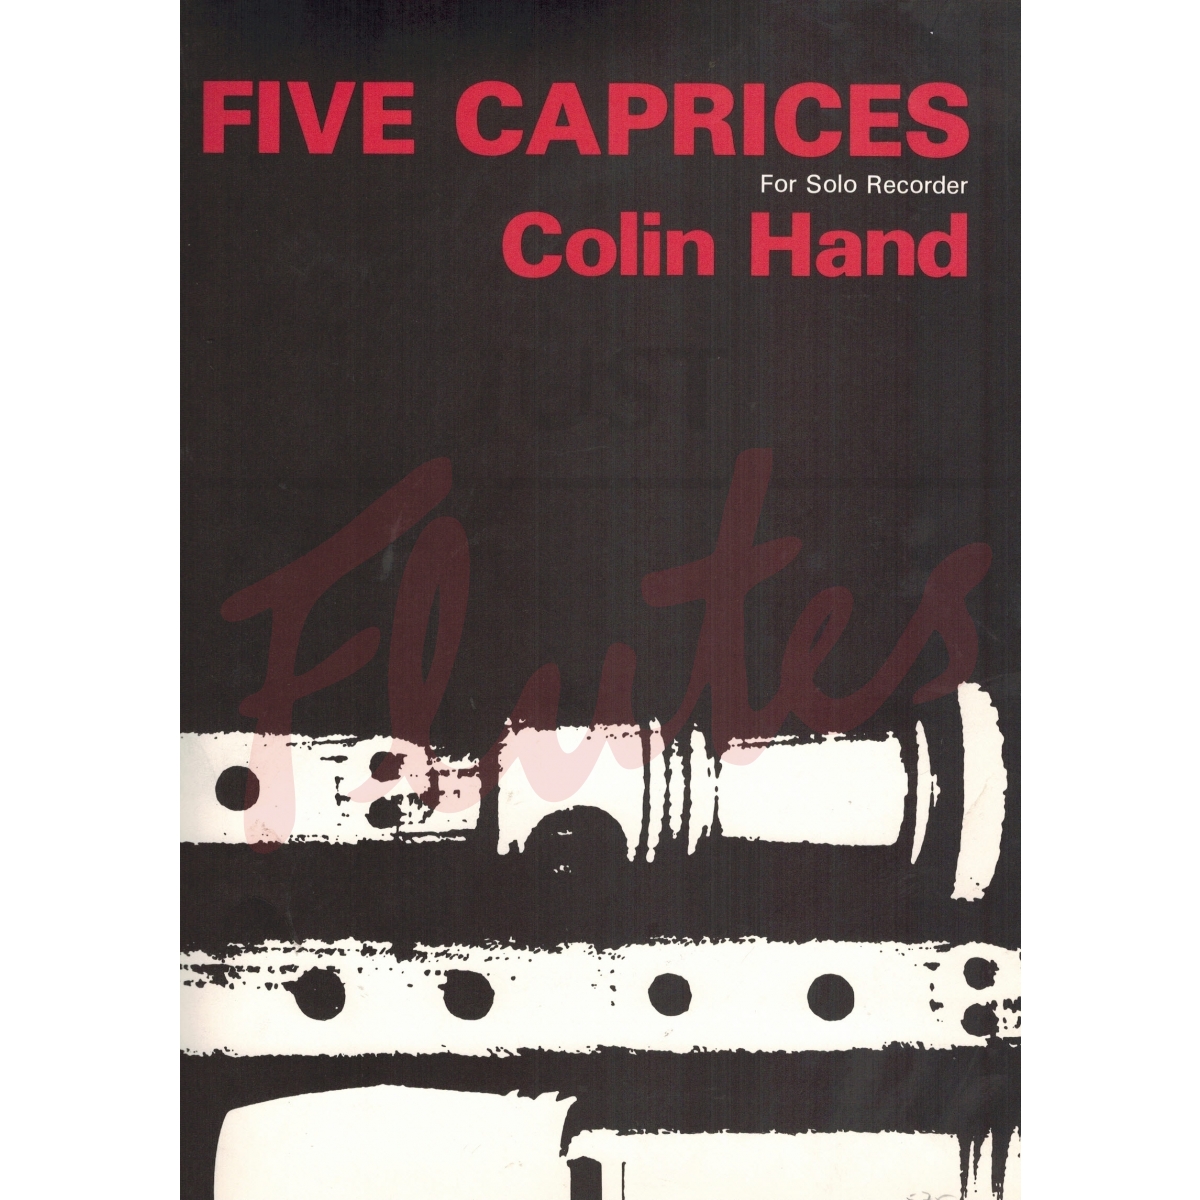 Five Caprices for Solo Recorder